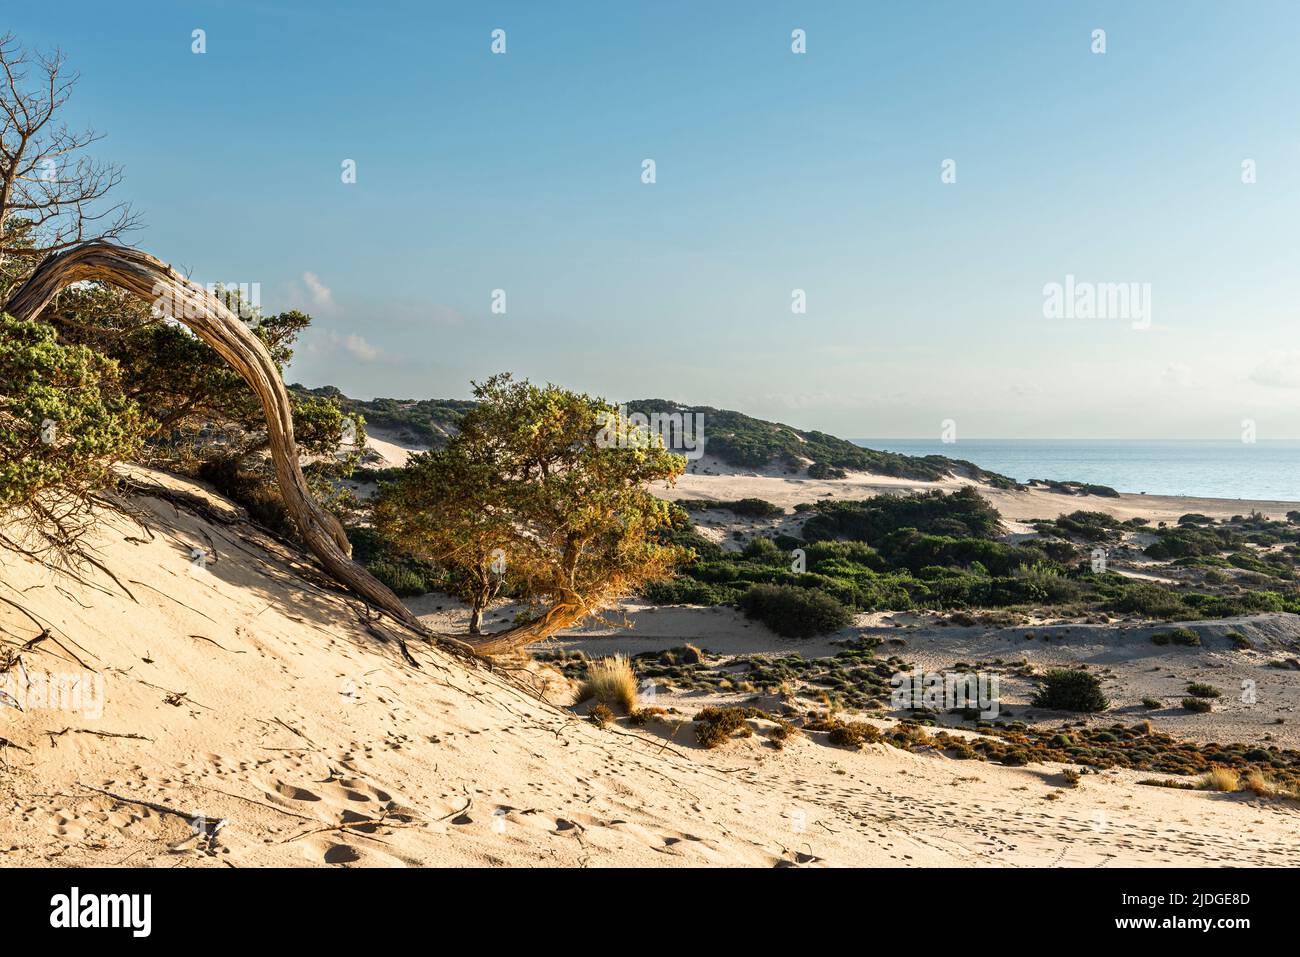 Juniper tree with crooked, bent branches in the sand of the dunes on the beach of Piscinas, Costa Verde in the warm evening sun, Sardinia, Italy Stock Photo